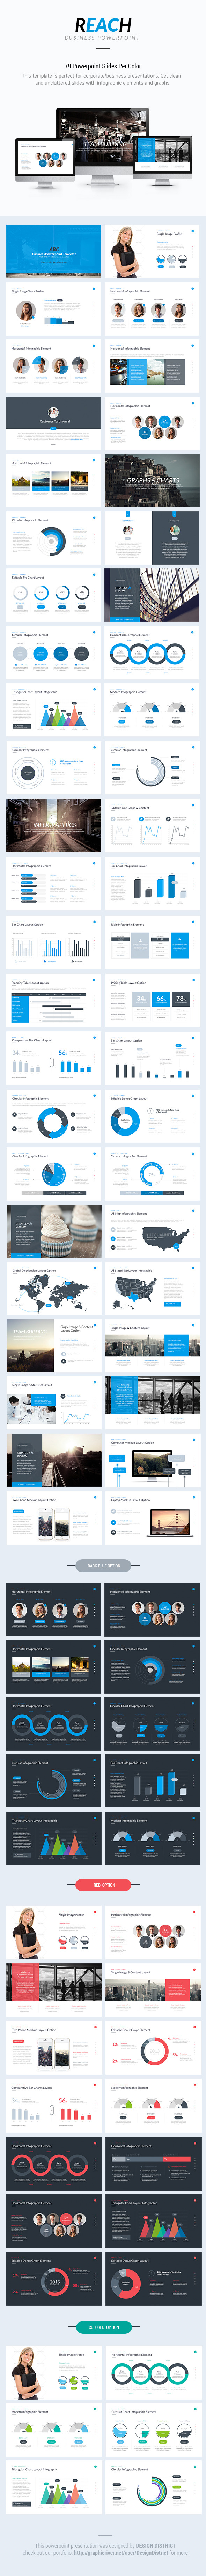 Business Powerpoint Template